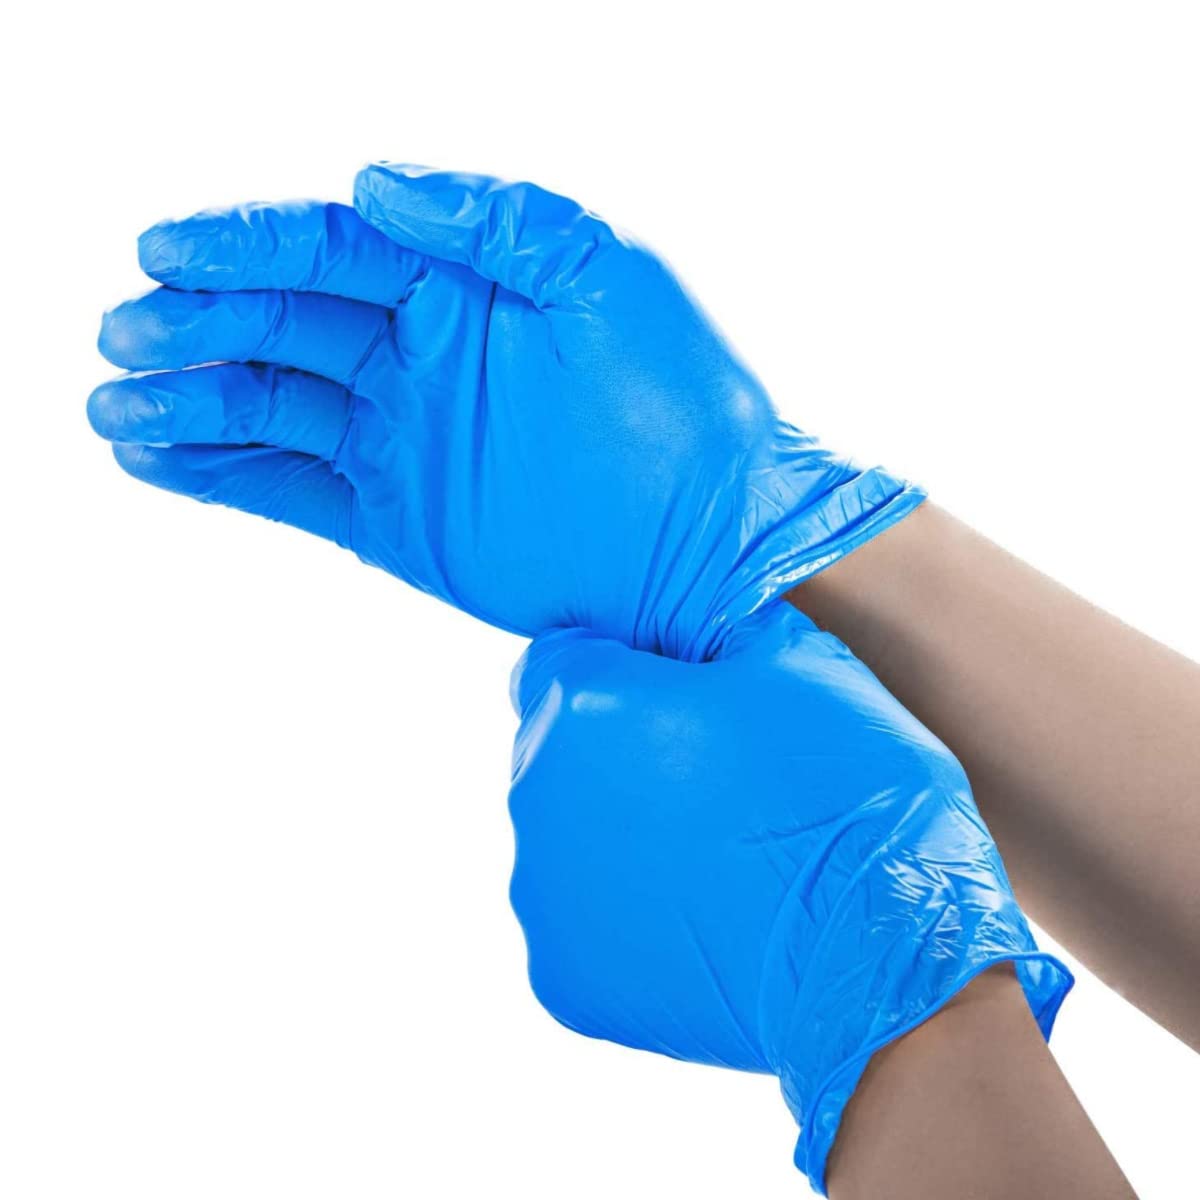 Jointown Basic Medical Synmax Vinyl Exam Gloves - Latex-Free & Powder-Free - Large, BMPF-3003(Case of 1,000)